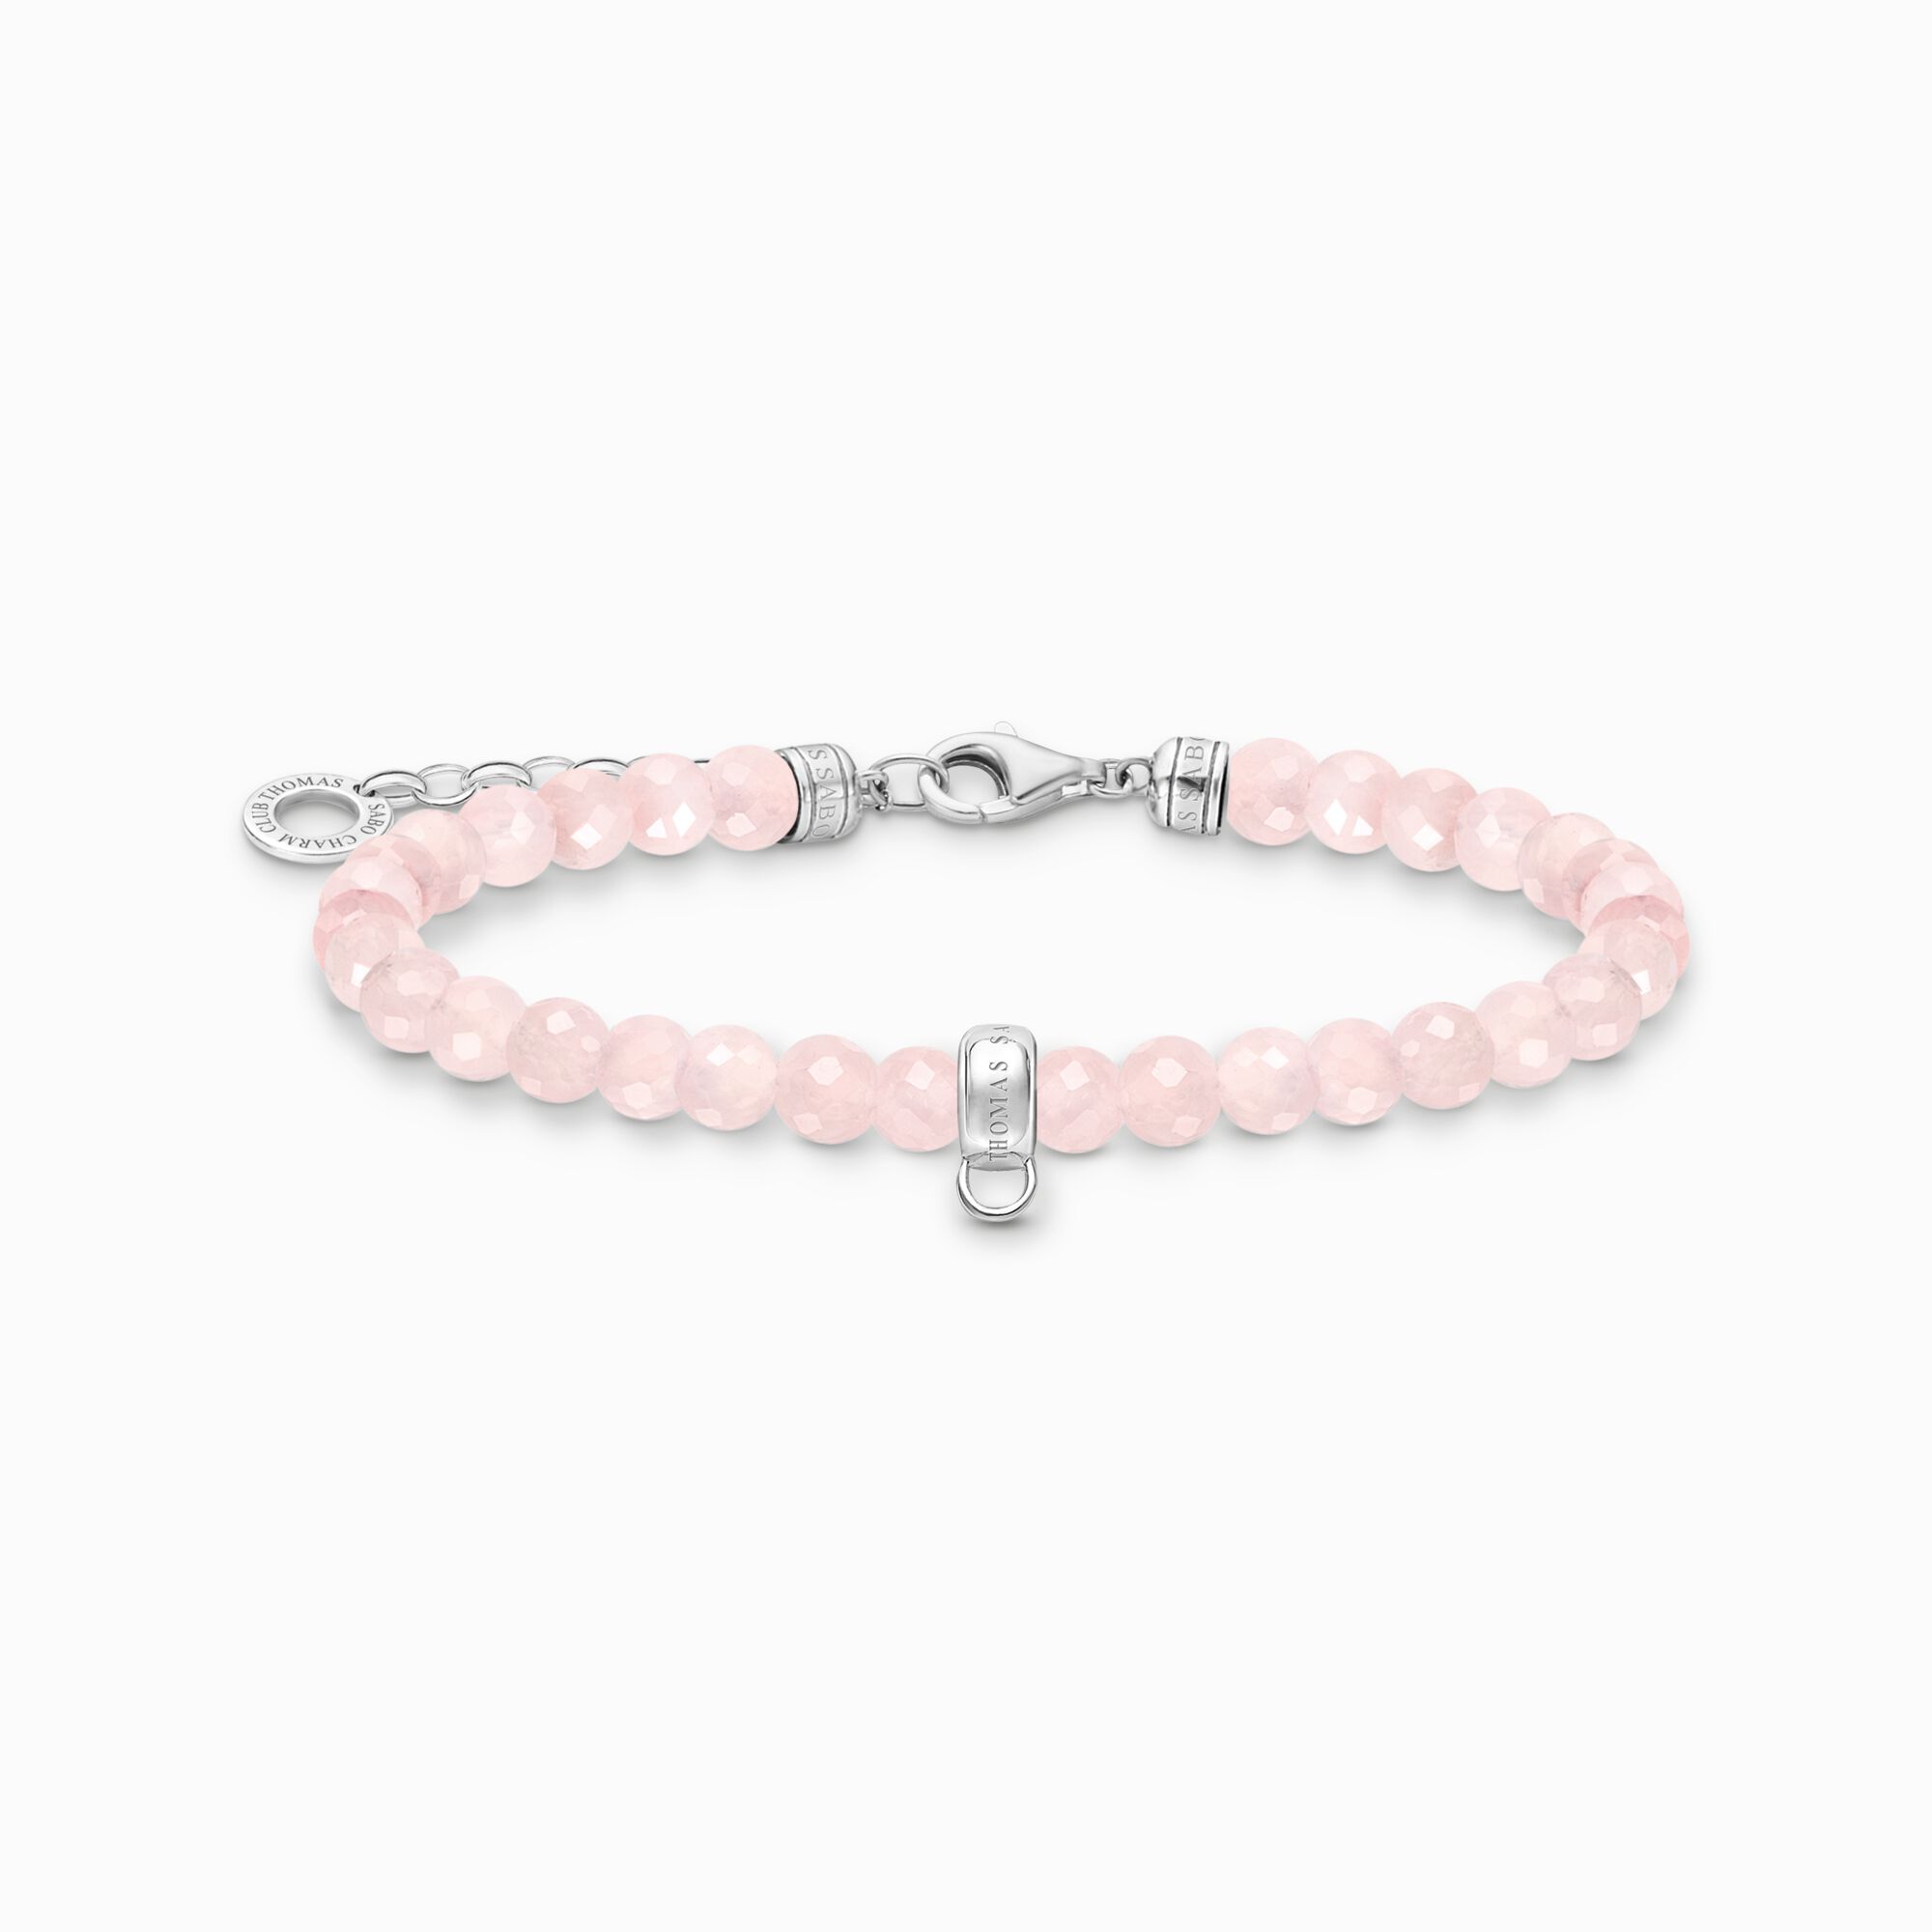 Charm bracelet with beads of rose quartz silver from the Charm Club collection in the THOMAS SABO online store